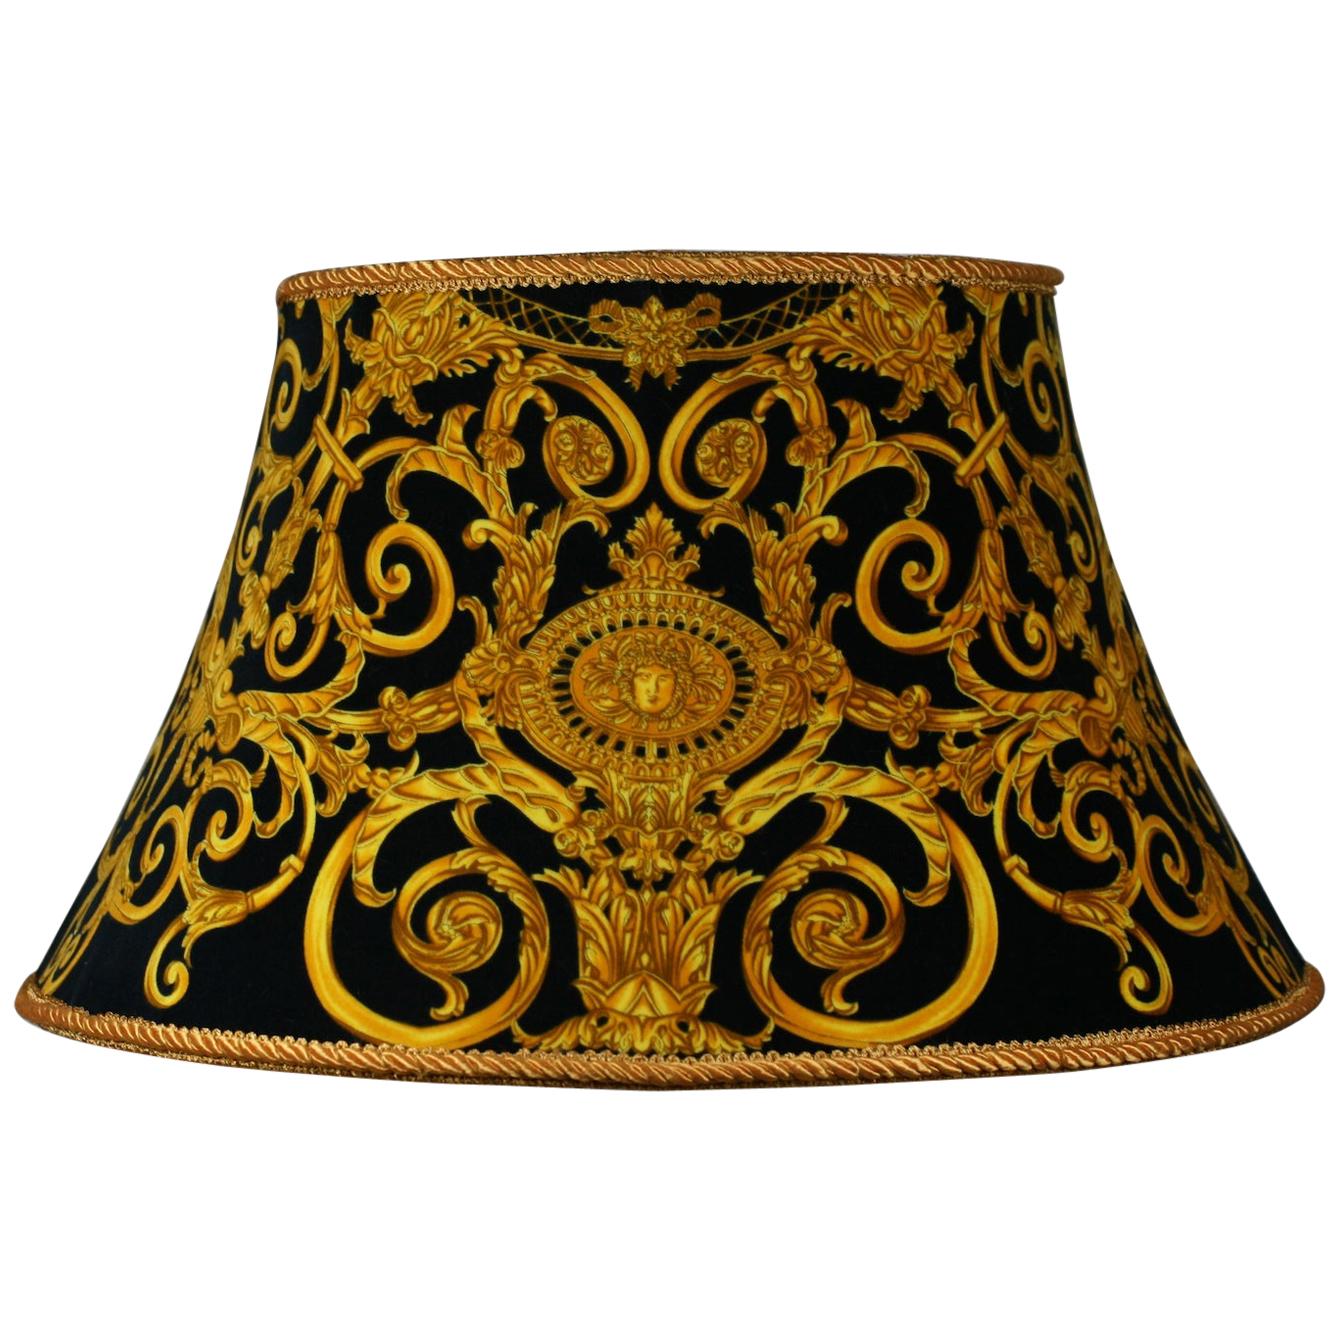 Gianni Versace Barocco Lampshade For, Versace Table Lamps Uk